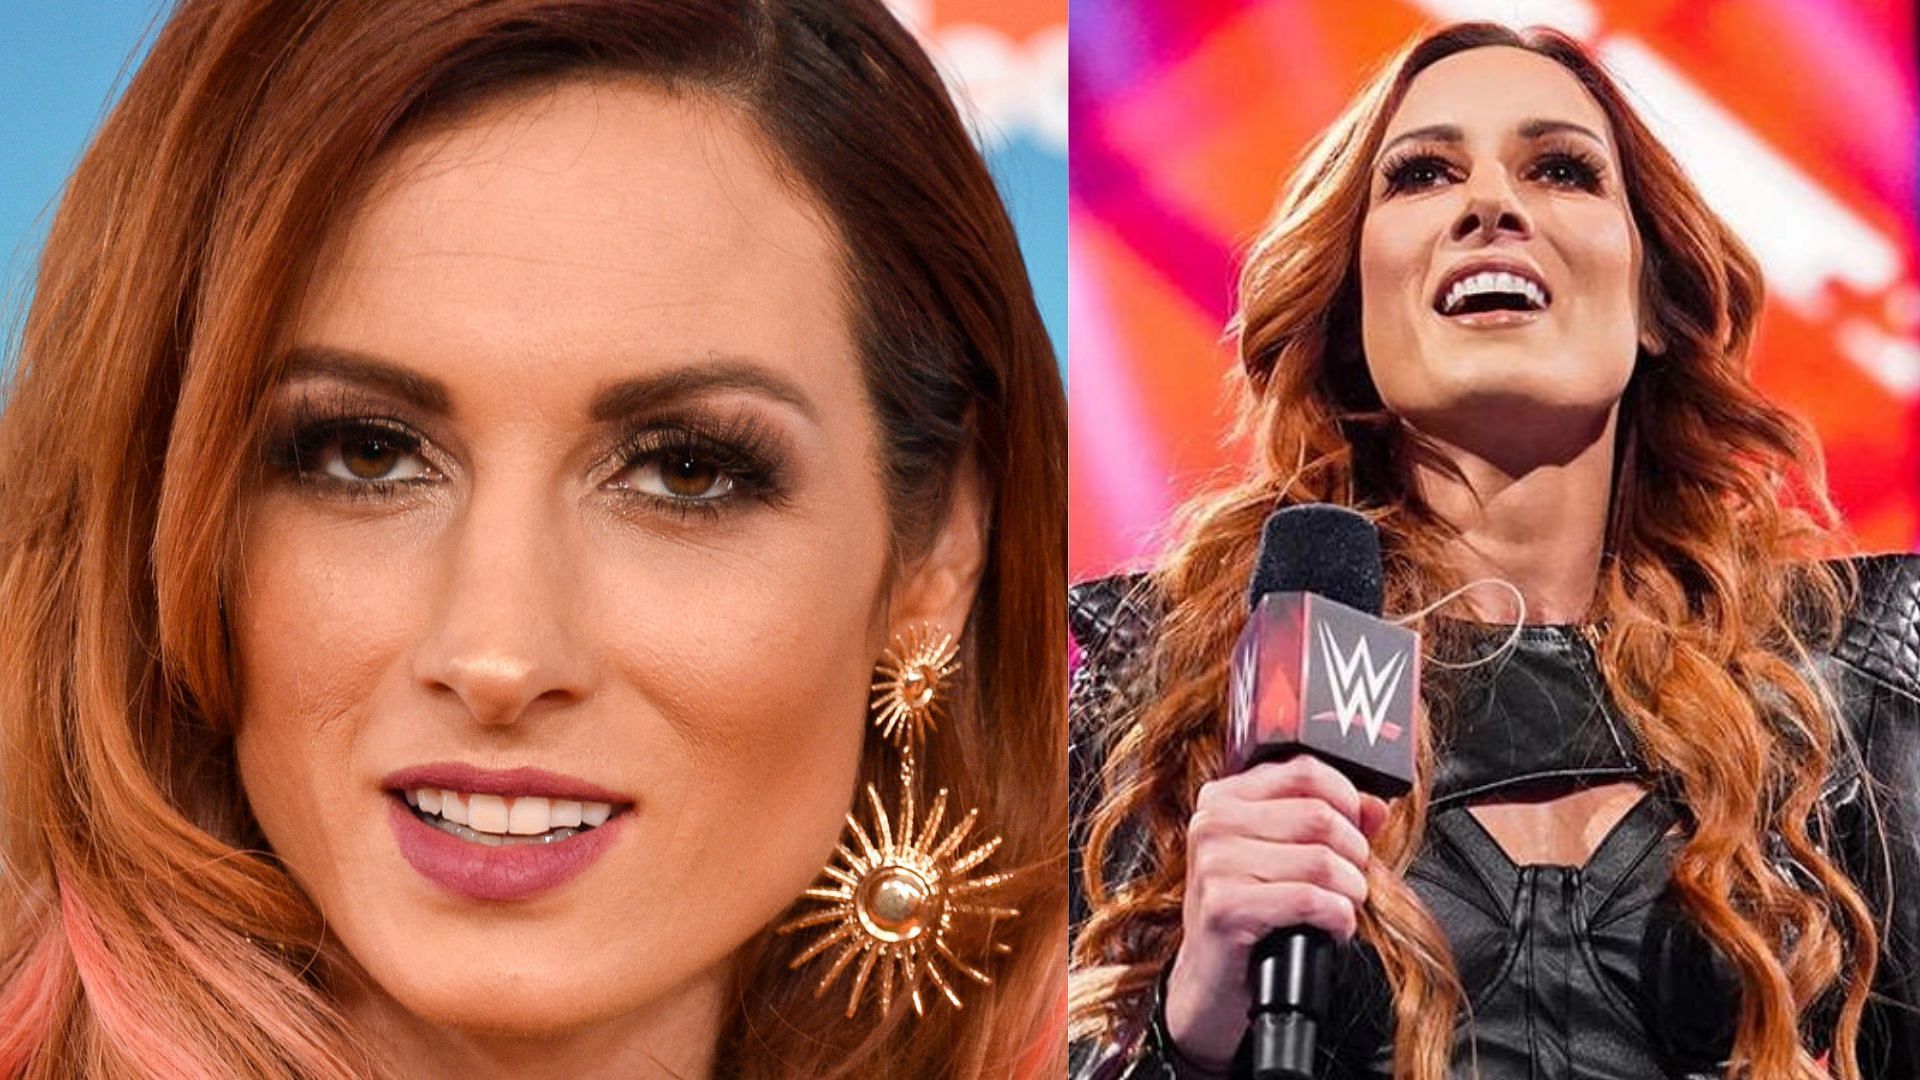 Becky Lynch has already been drafted to the WWE RAW roster.